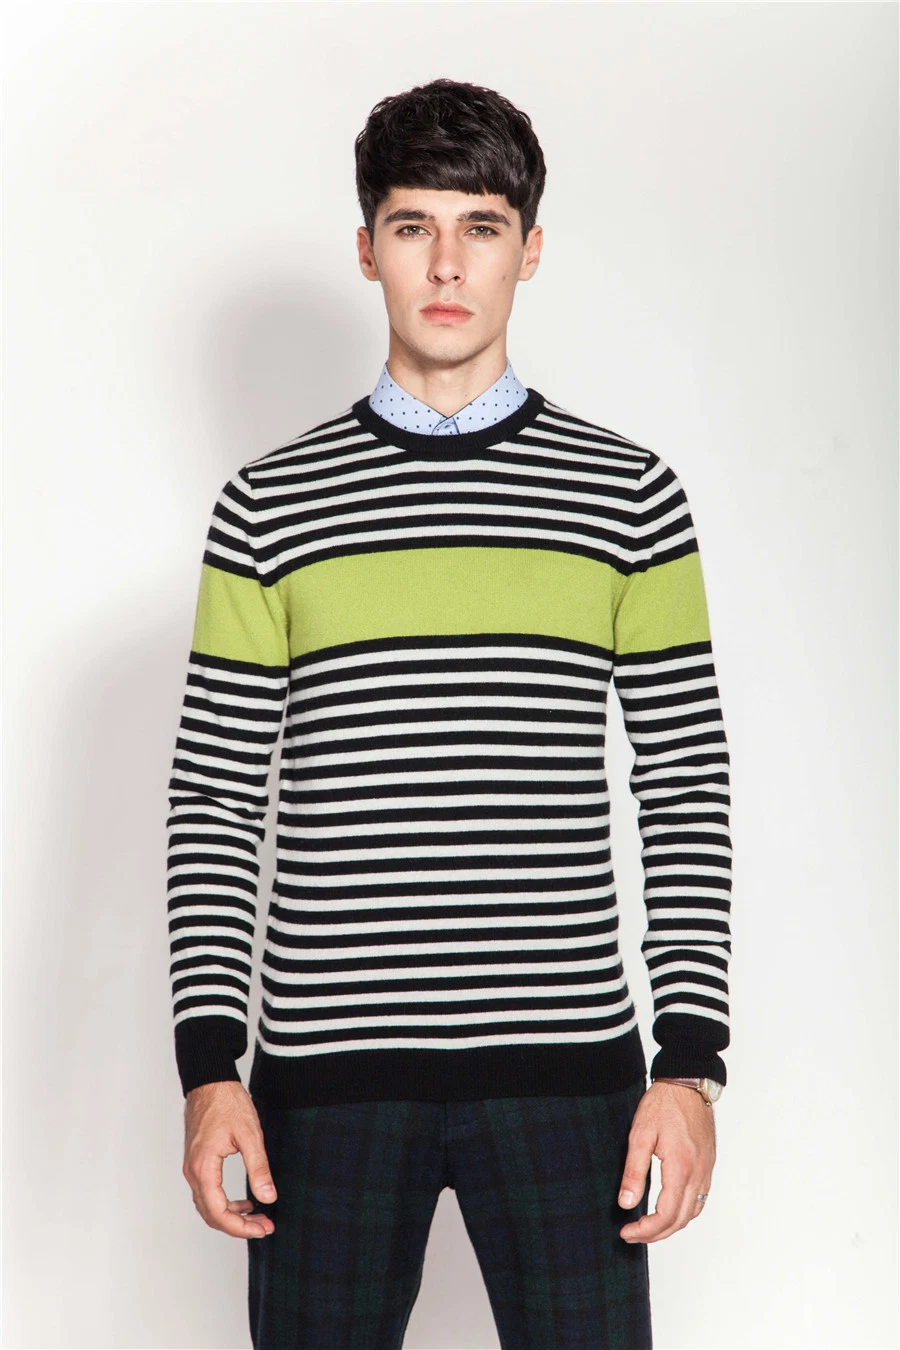 100%Cashmere Stiped hombres tejer Jersey puente